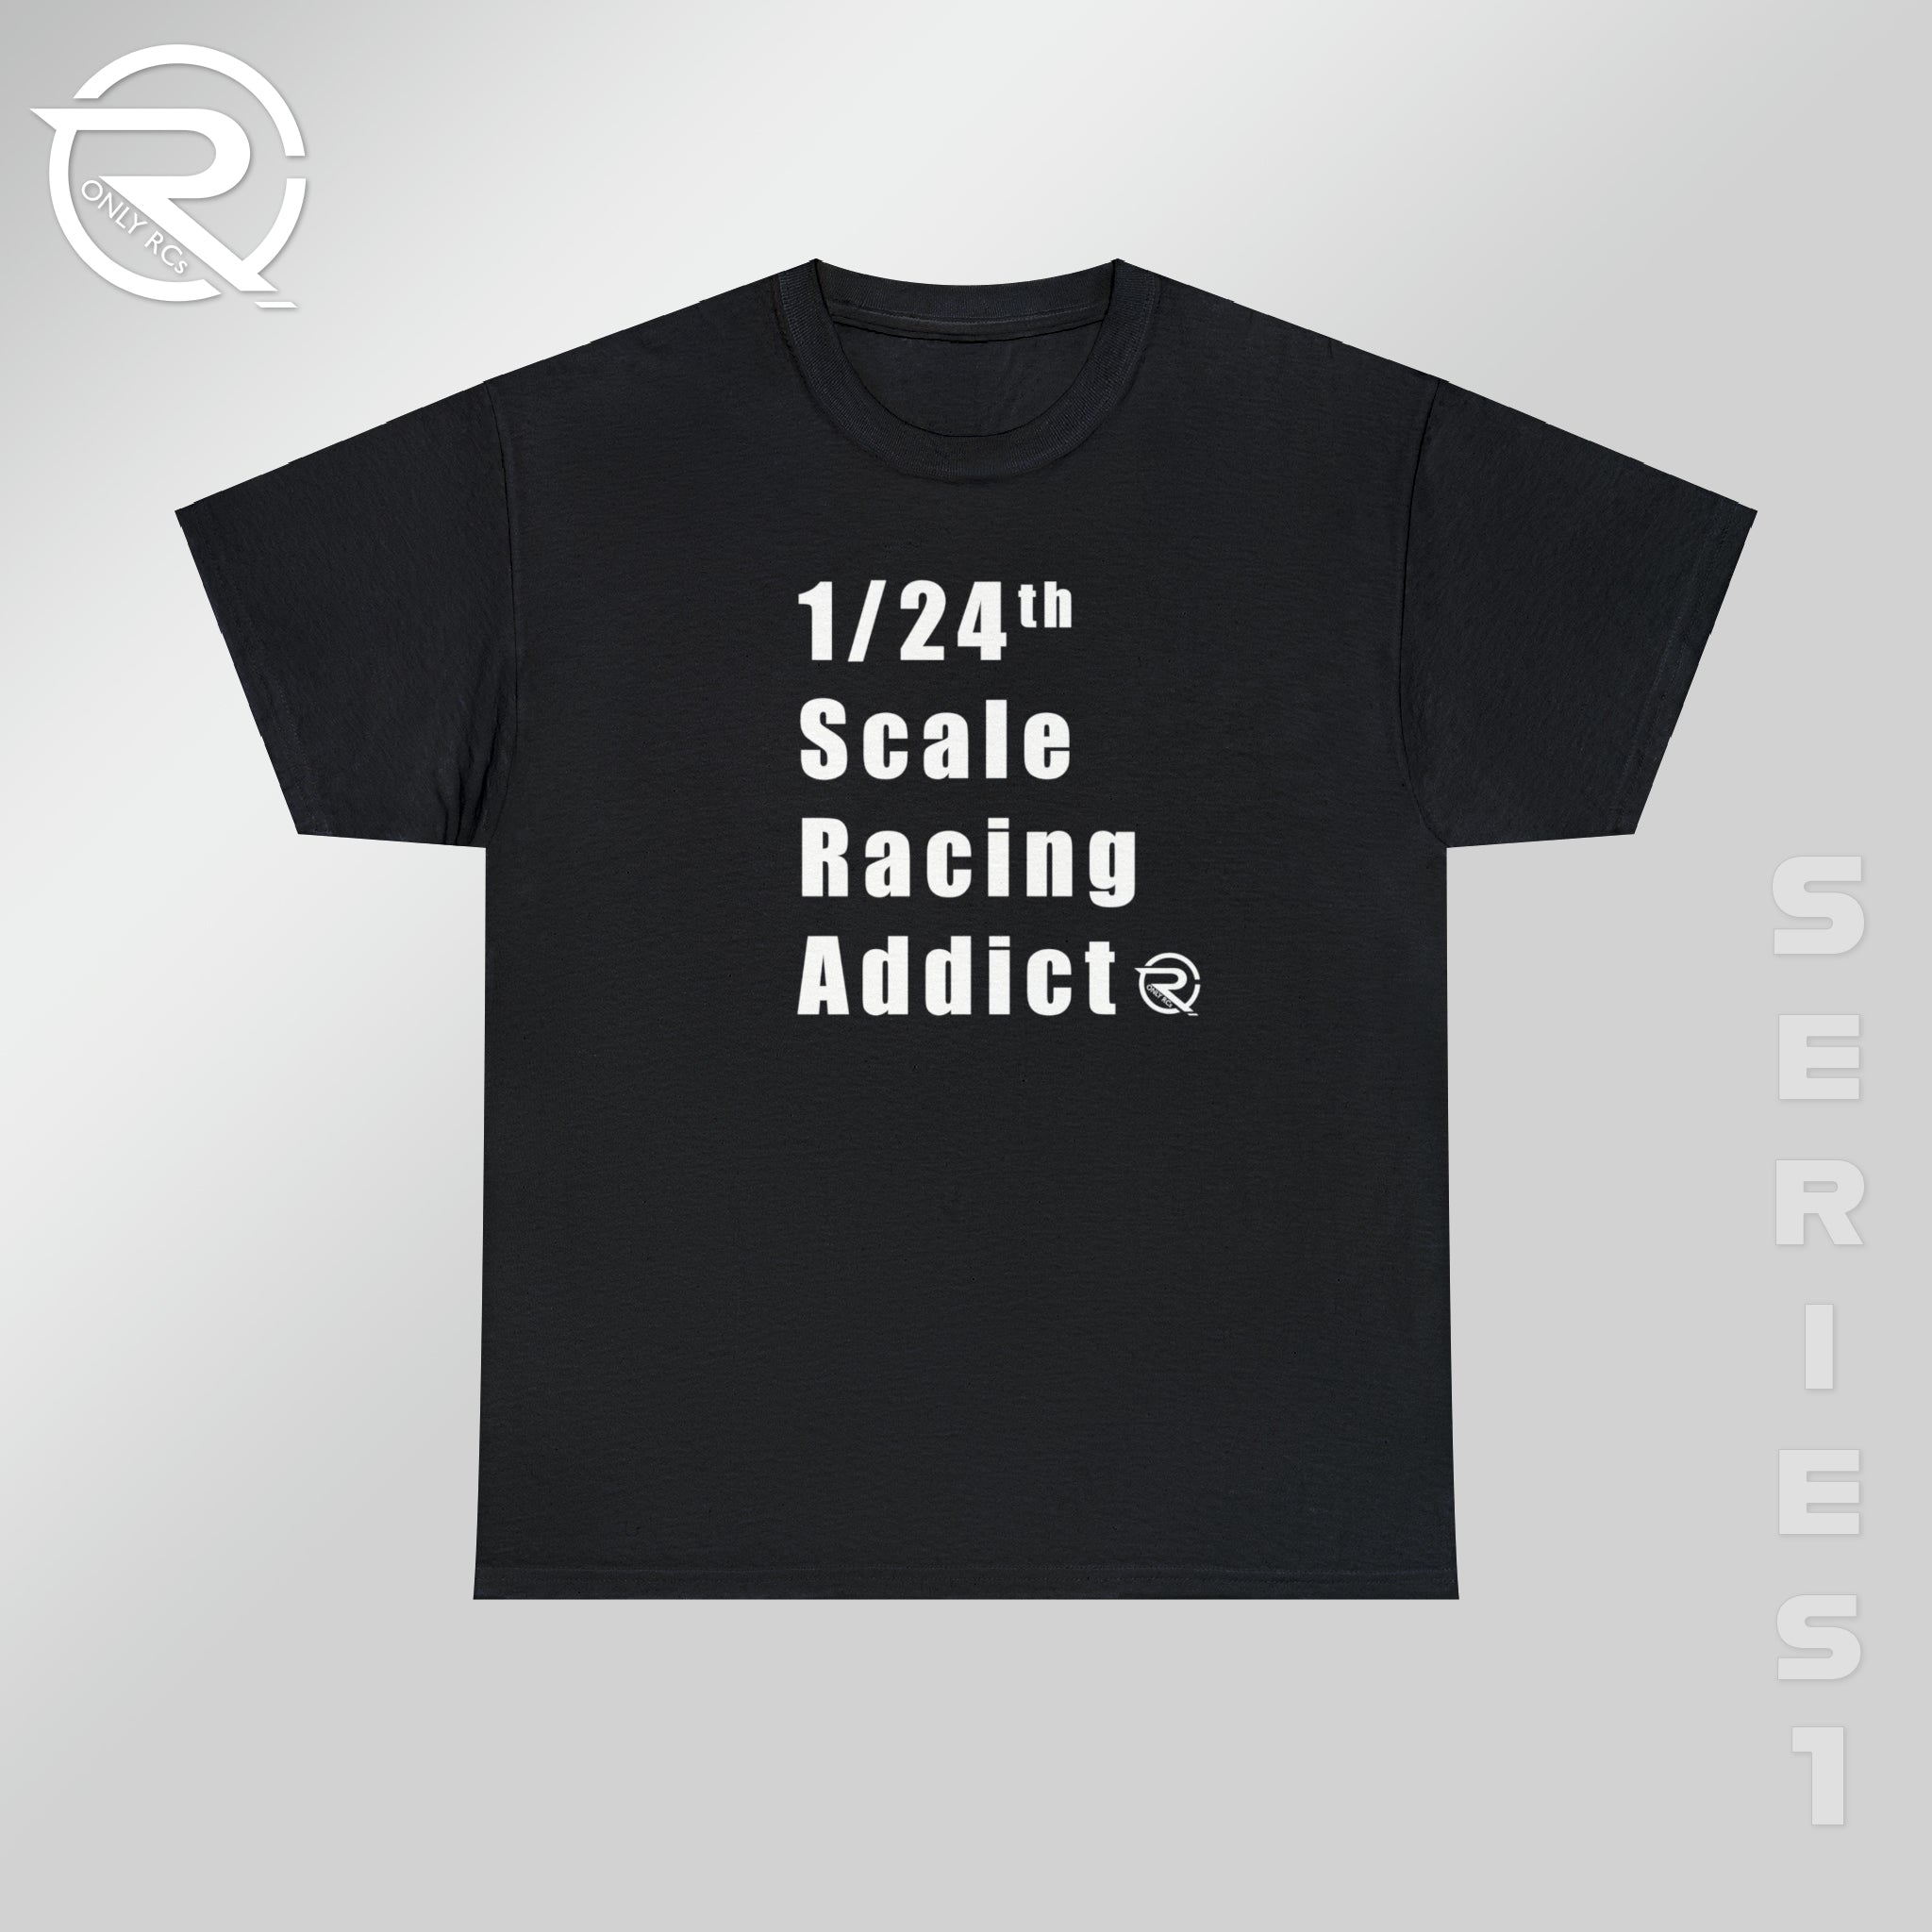 OnlyRCs - 1/24th Scale Racing Tee - Heavy Cotton 1 Addict Series